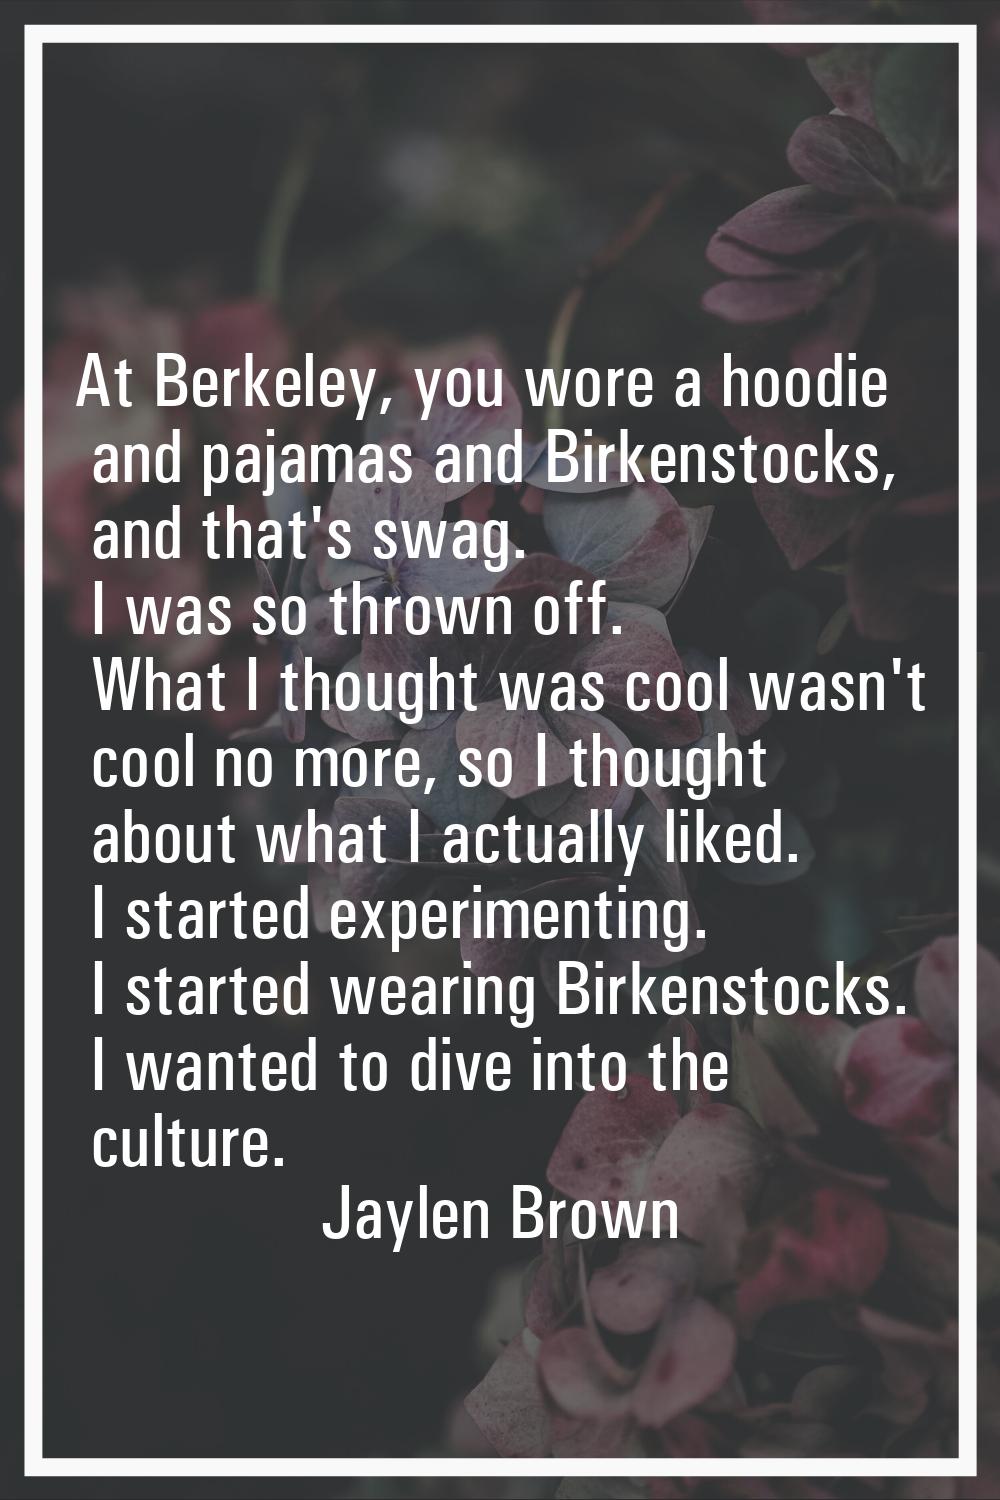 At Berkeley, you wore a hoodie and pajamas and Birkenstocks, and that's swag. I was so thrown off. 